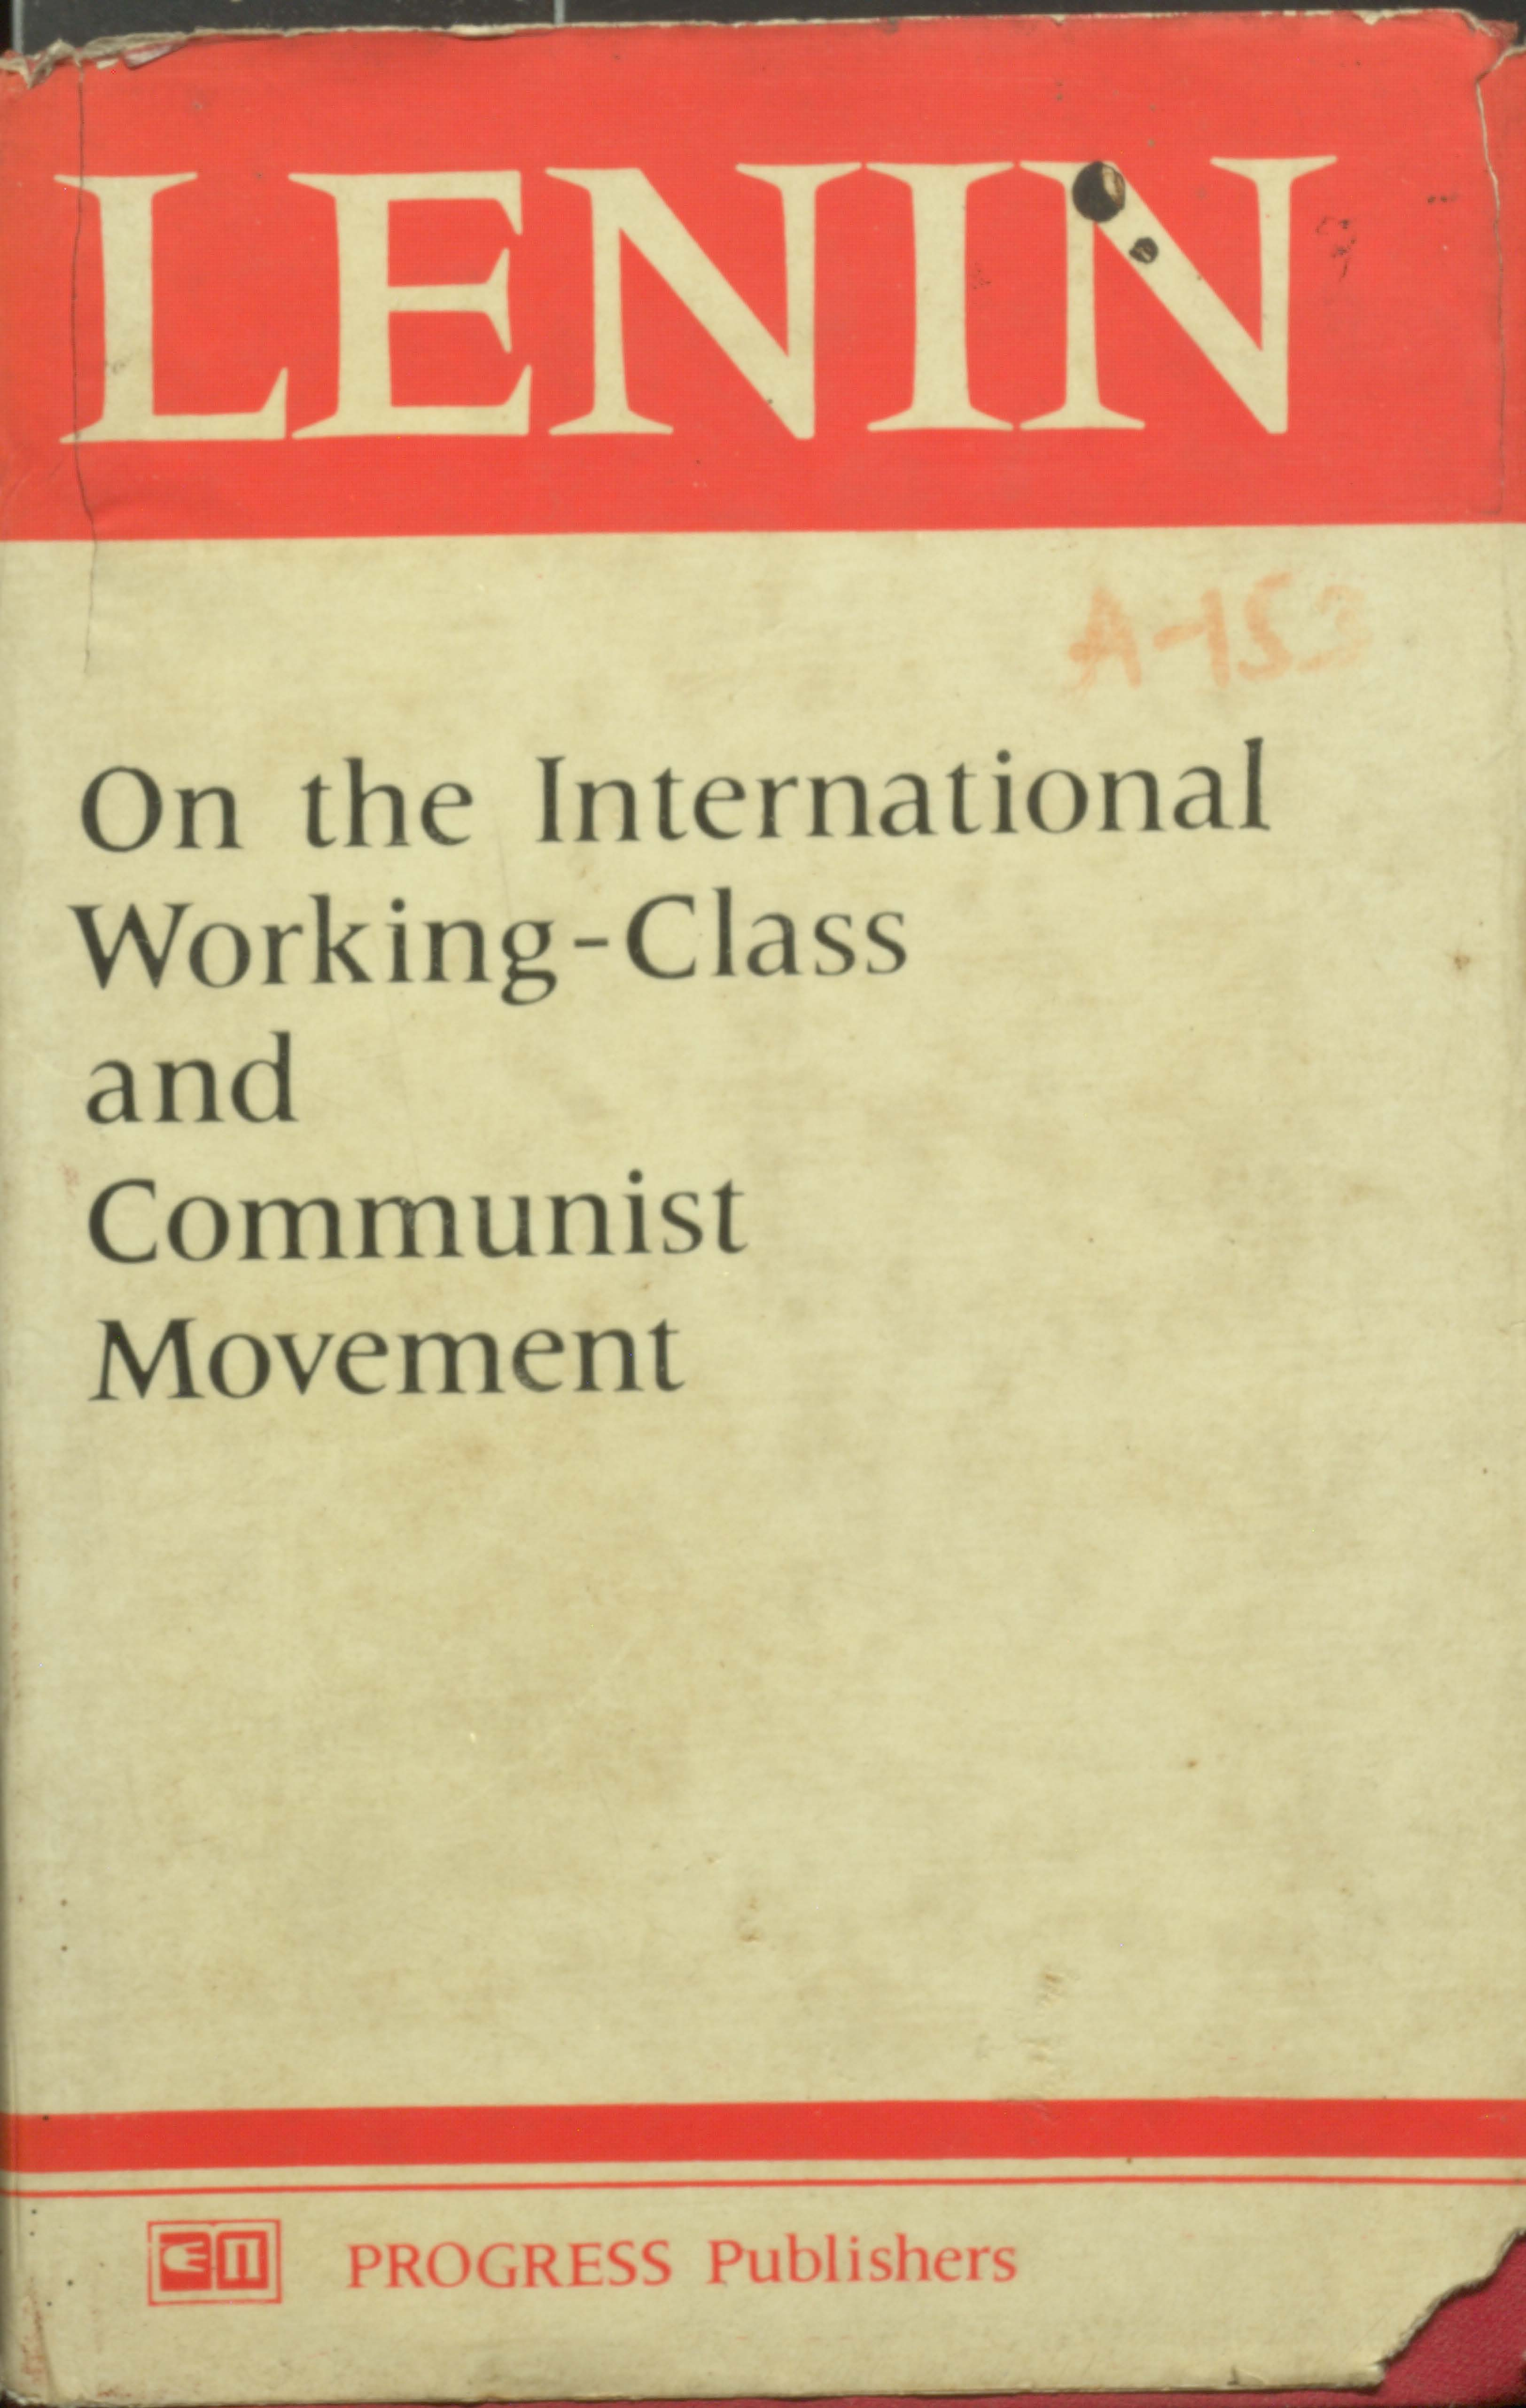 LENIN on the international working - class and communist movement